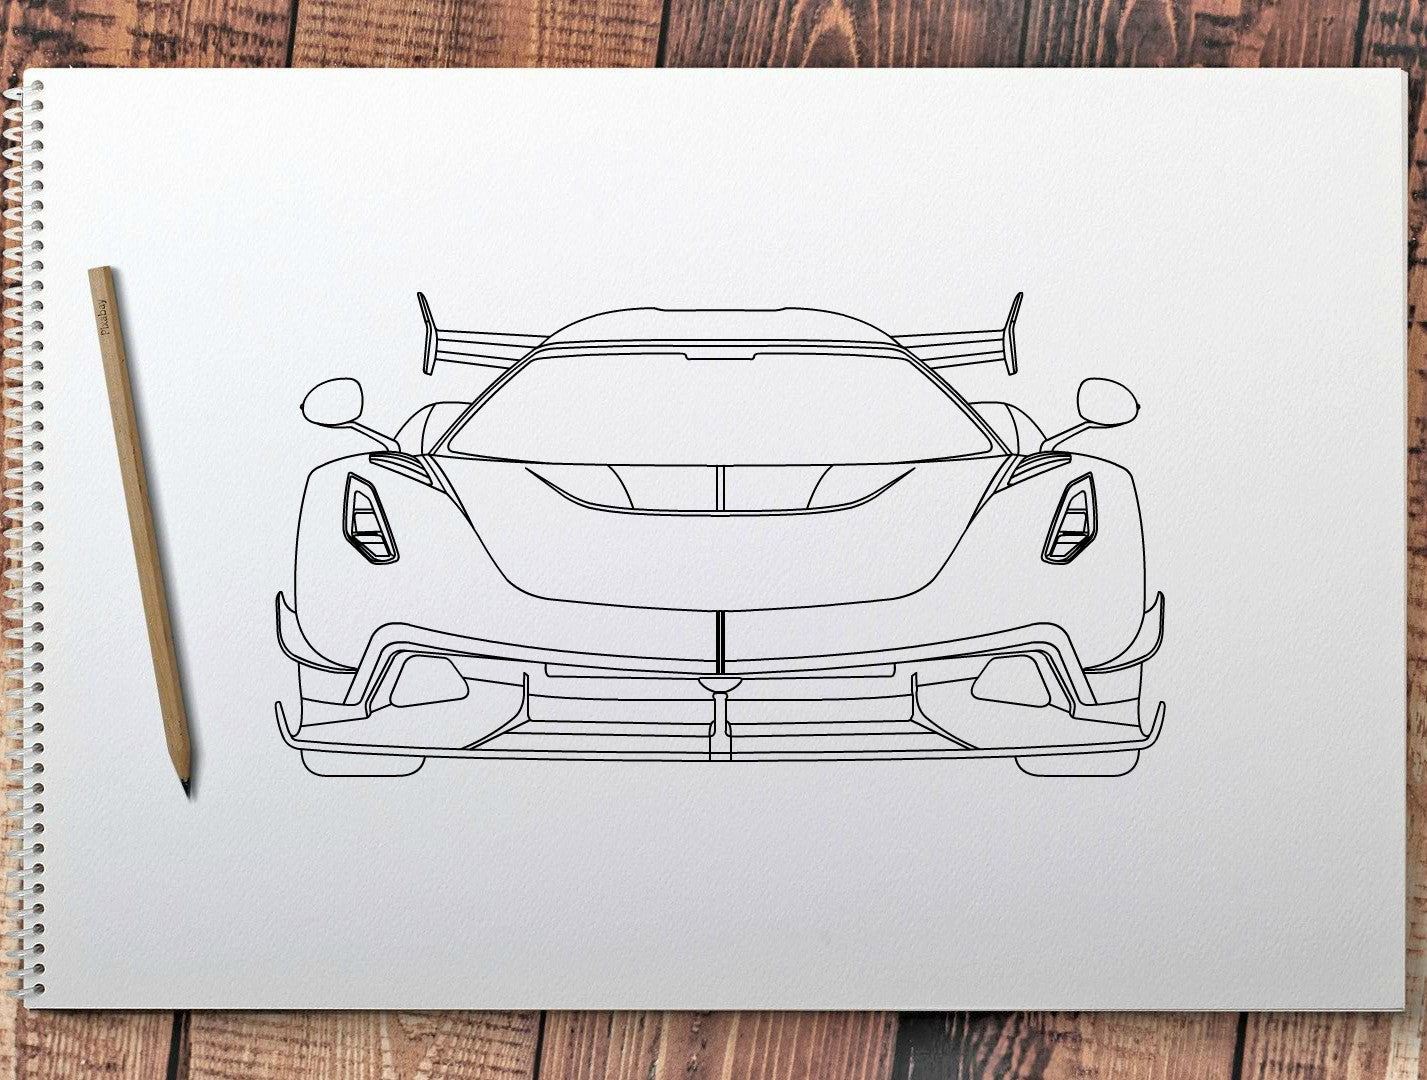 Fun and Creative Cartoon Car Drawings for Your Design Projects